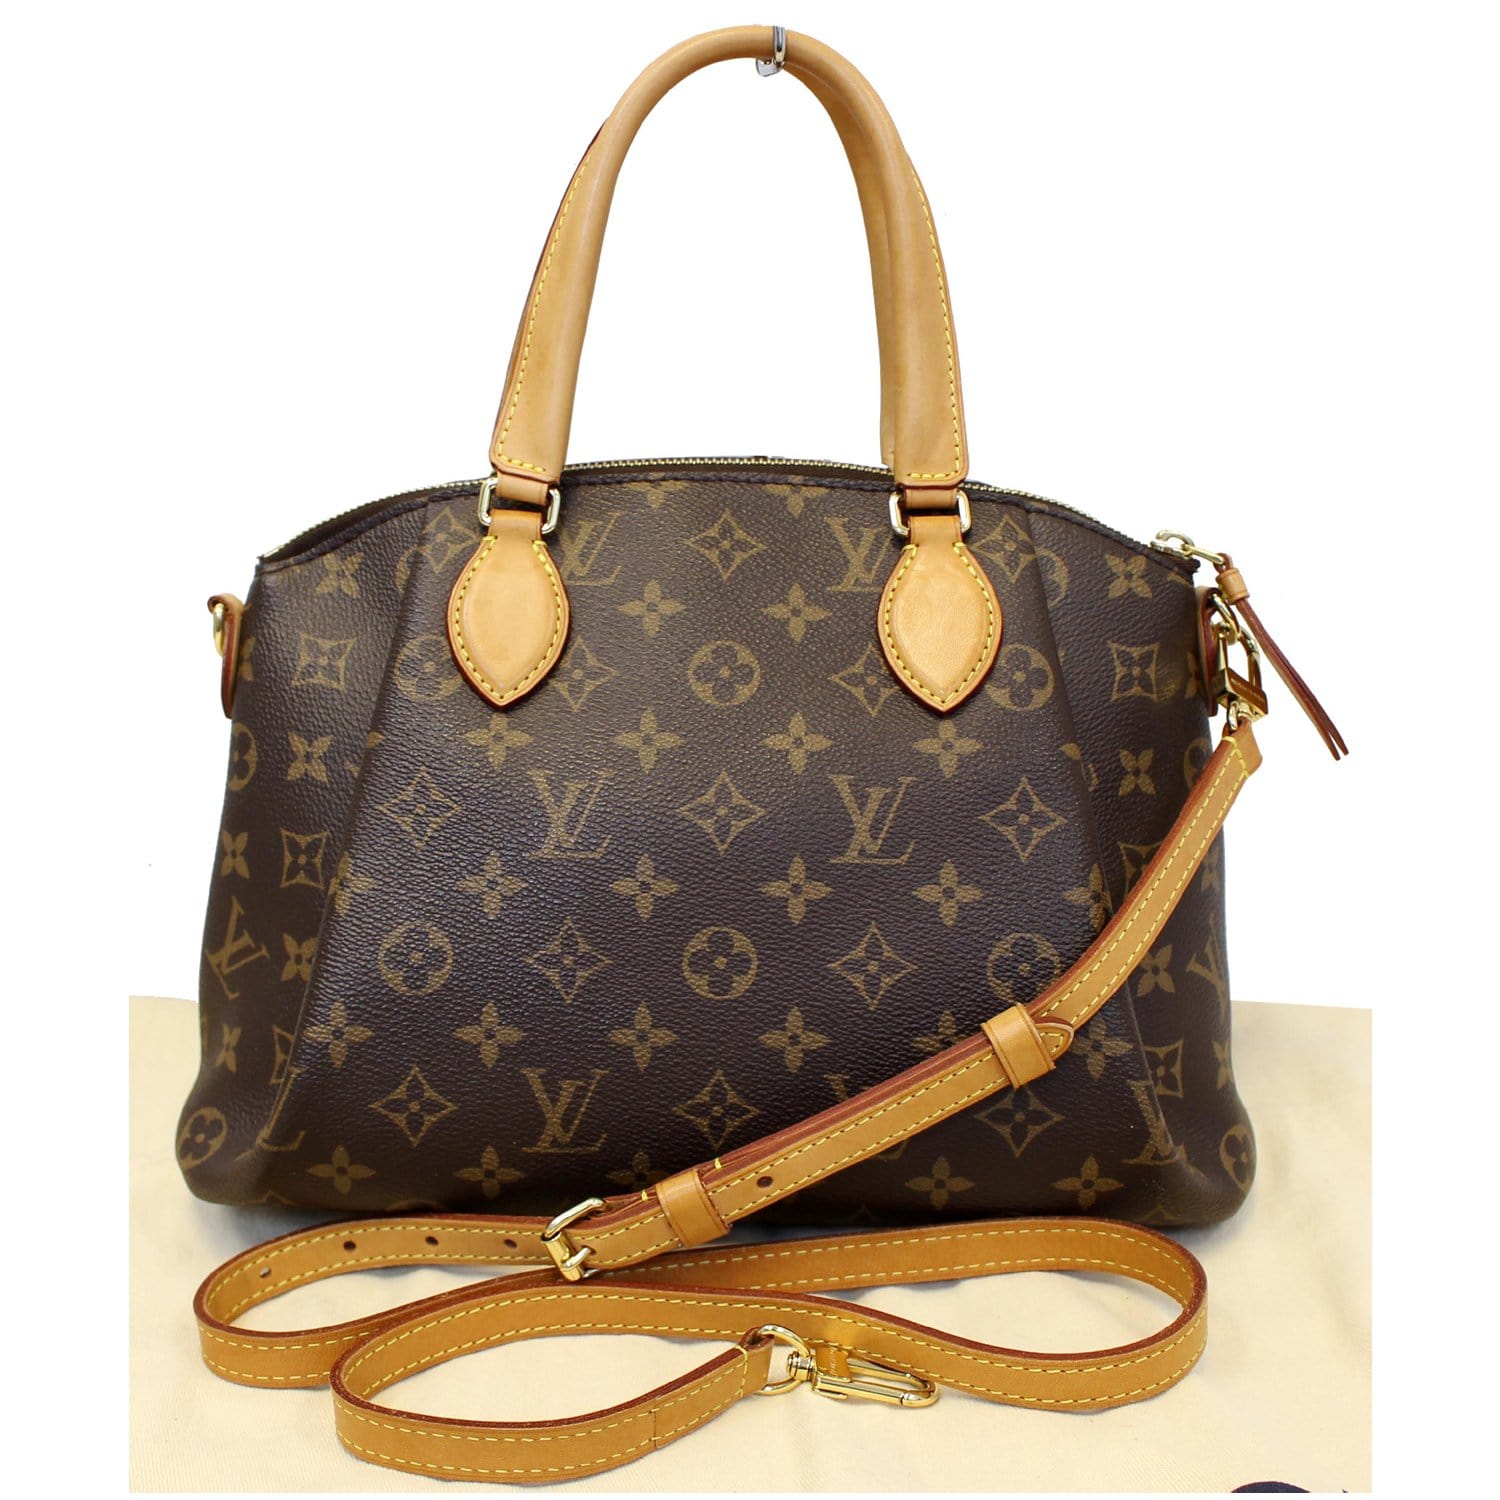 Authentic Louis Vuitton Rivoli PM 2way shoulder hand bag dust bag 10x15  inches, Luxury, Bags & Wallets on Carousell